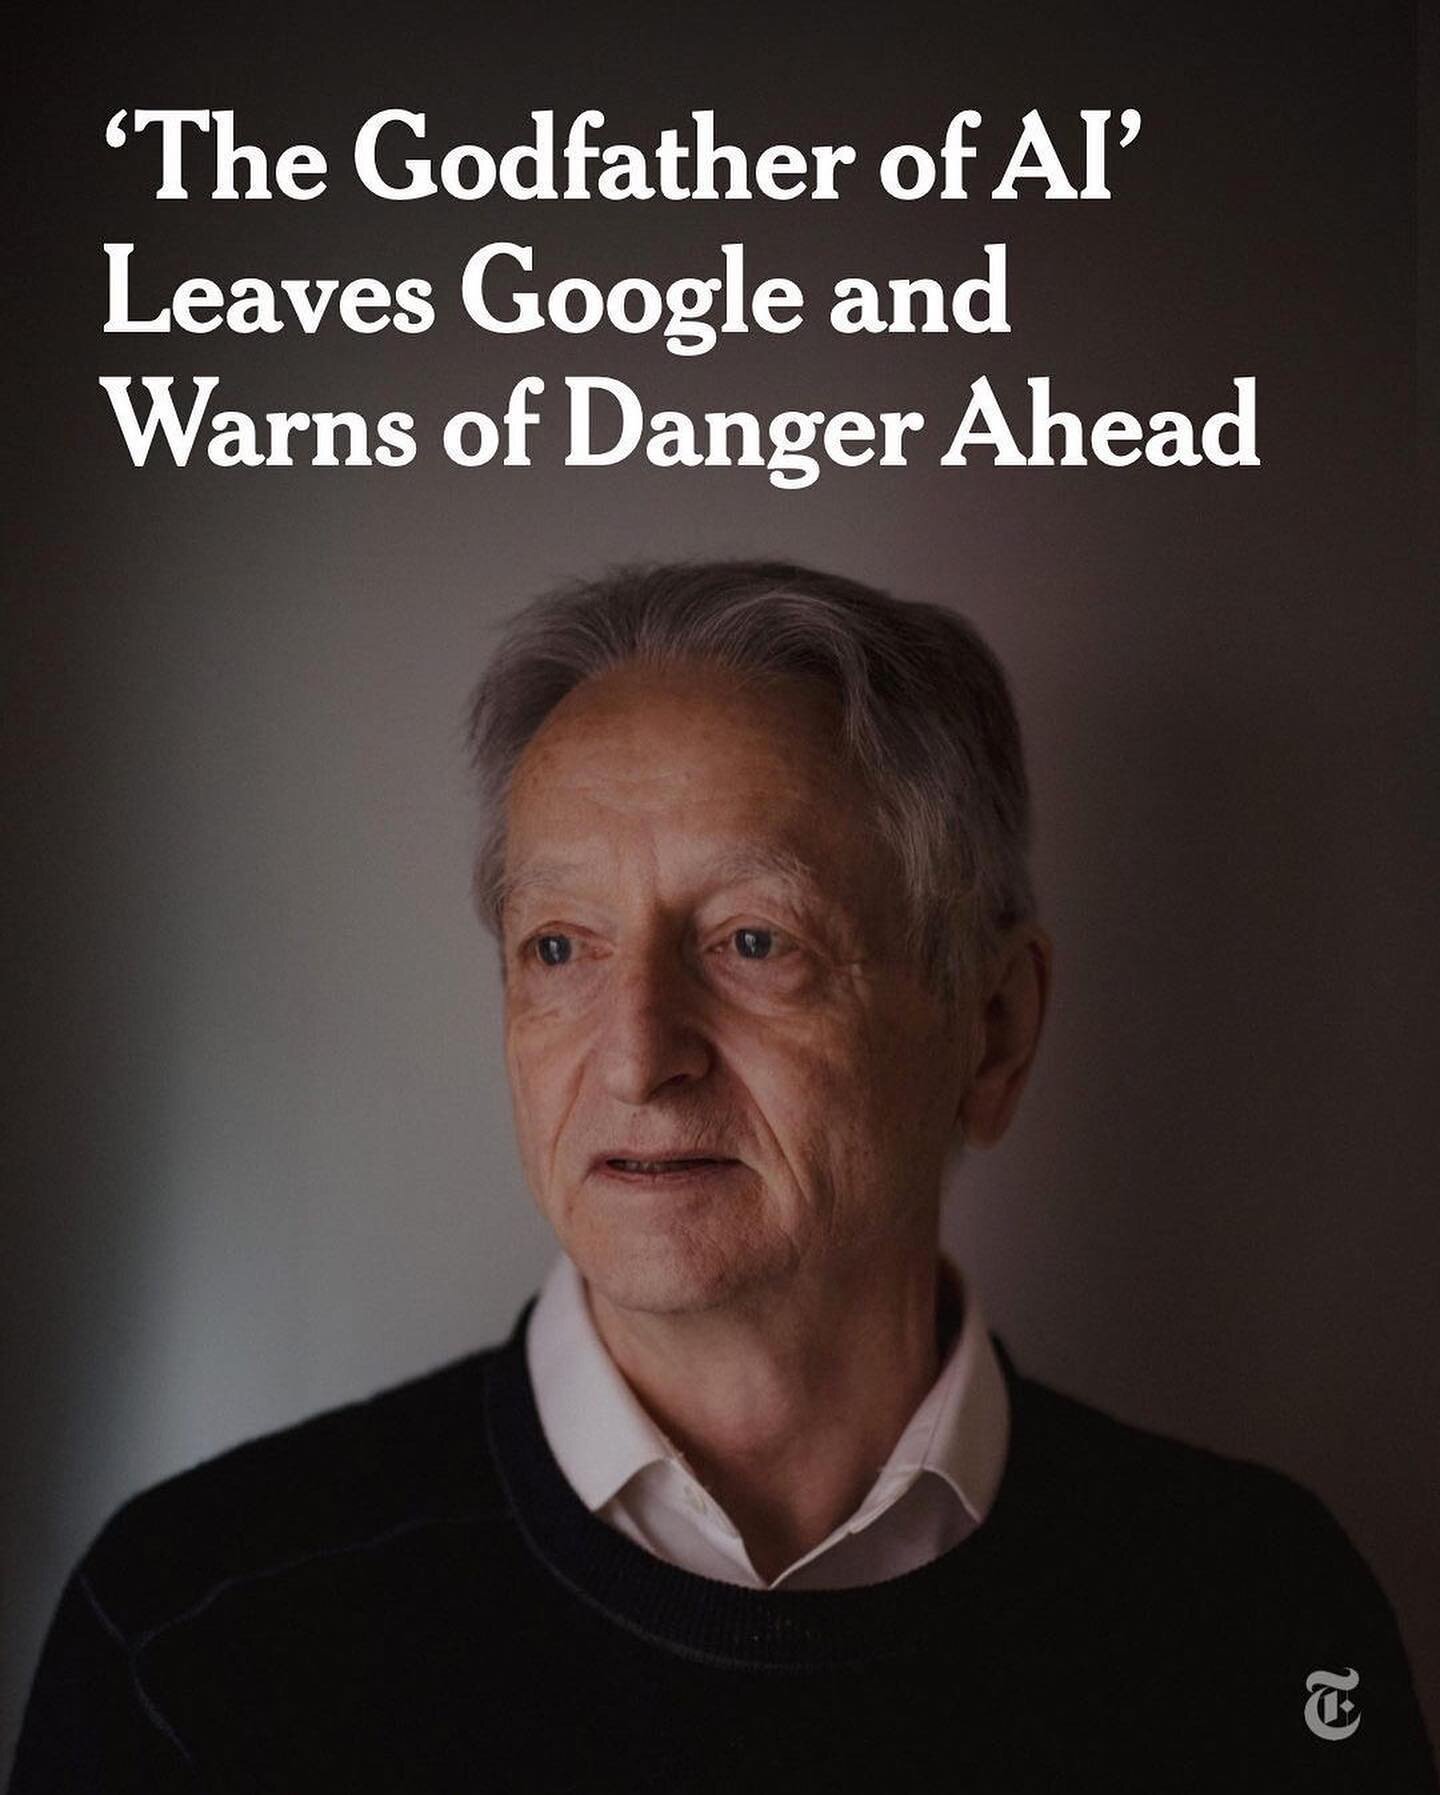 As&iacute; las cosas con la famosa inteligencia artificial. #repost &bull; @nytimes For half a century, Geoffrey Hinton nurtured the technology at the heart of chatbots like ChatGPT. Now he worries it will cause serious harm.

In 2012, he and two of 